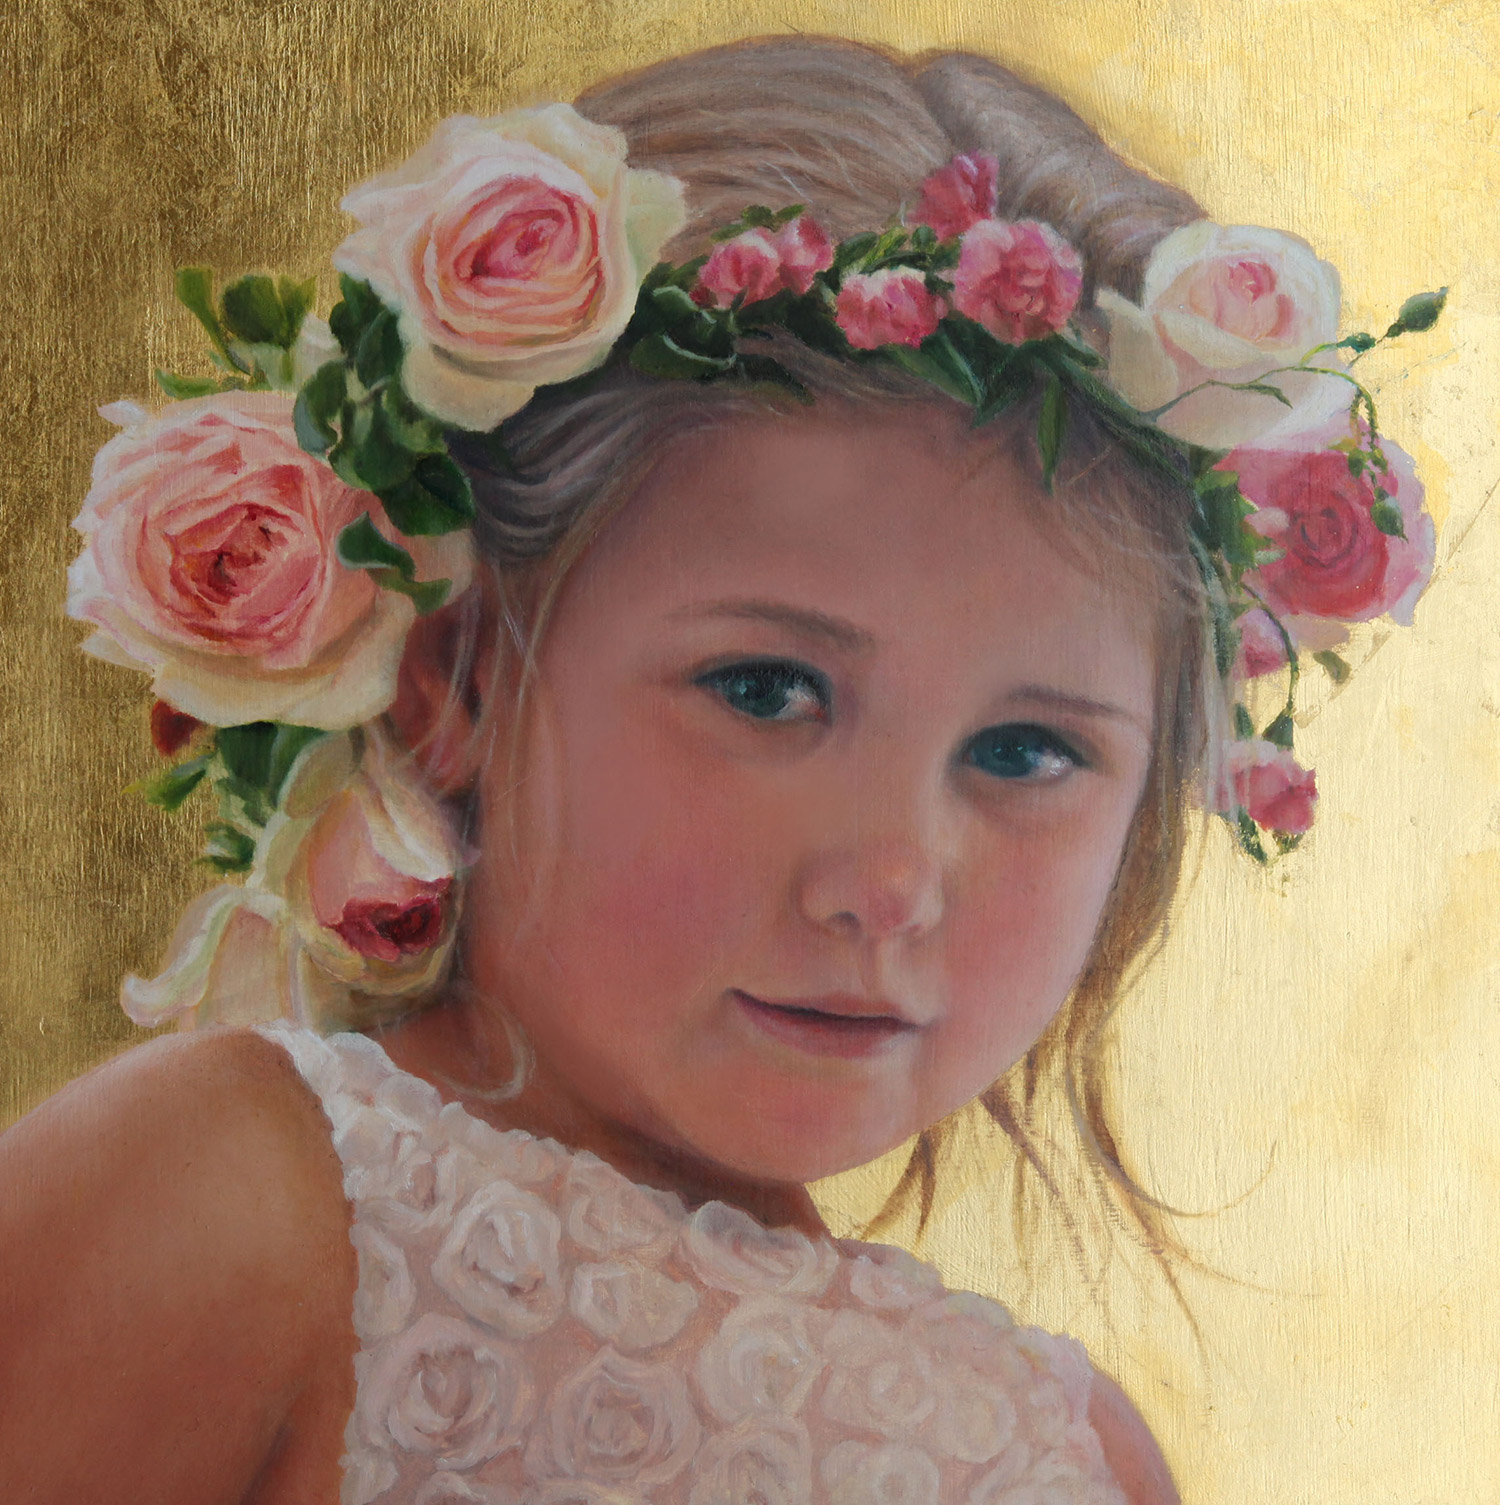 Original oil painting on 24 carat gold leaf on poplar wood panel. A garland of pink and cream roses crown her head - a celebration of summer. The painting style is a fusion of realism, surrealism, symbolism and impressionism. Rose: The Eden Rose - aka 'Pierre de Ronsard'